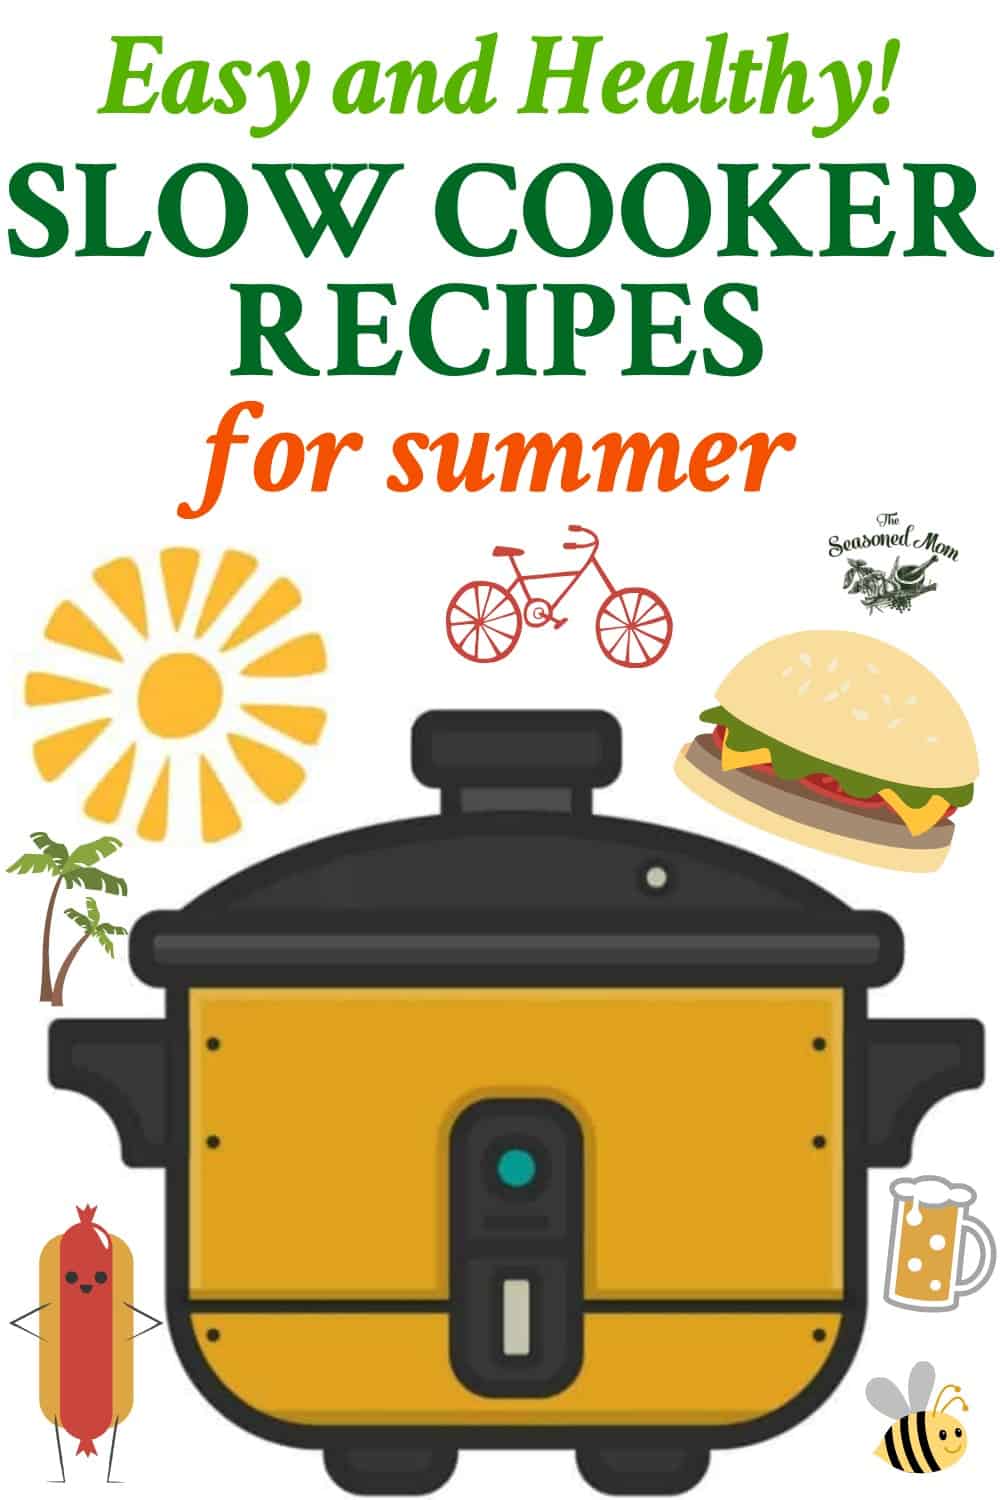 Easy Healthy Slow Cooker Recipes for Summer! - The Seasoned Mom